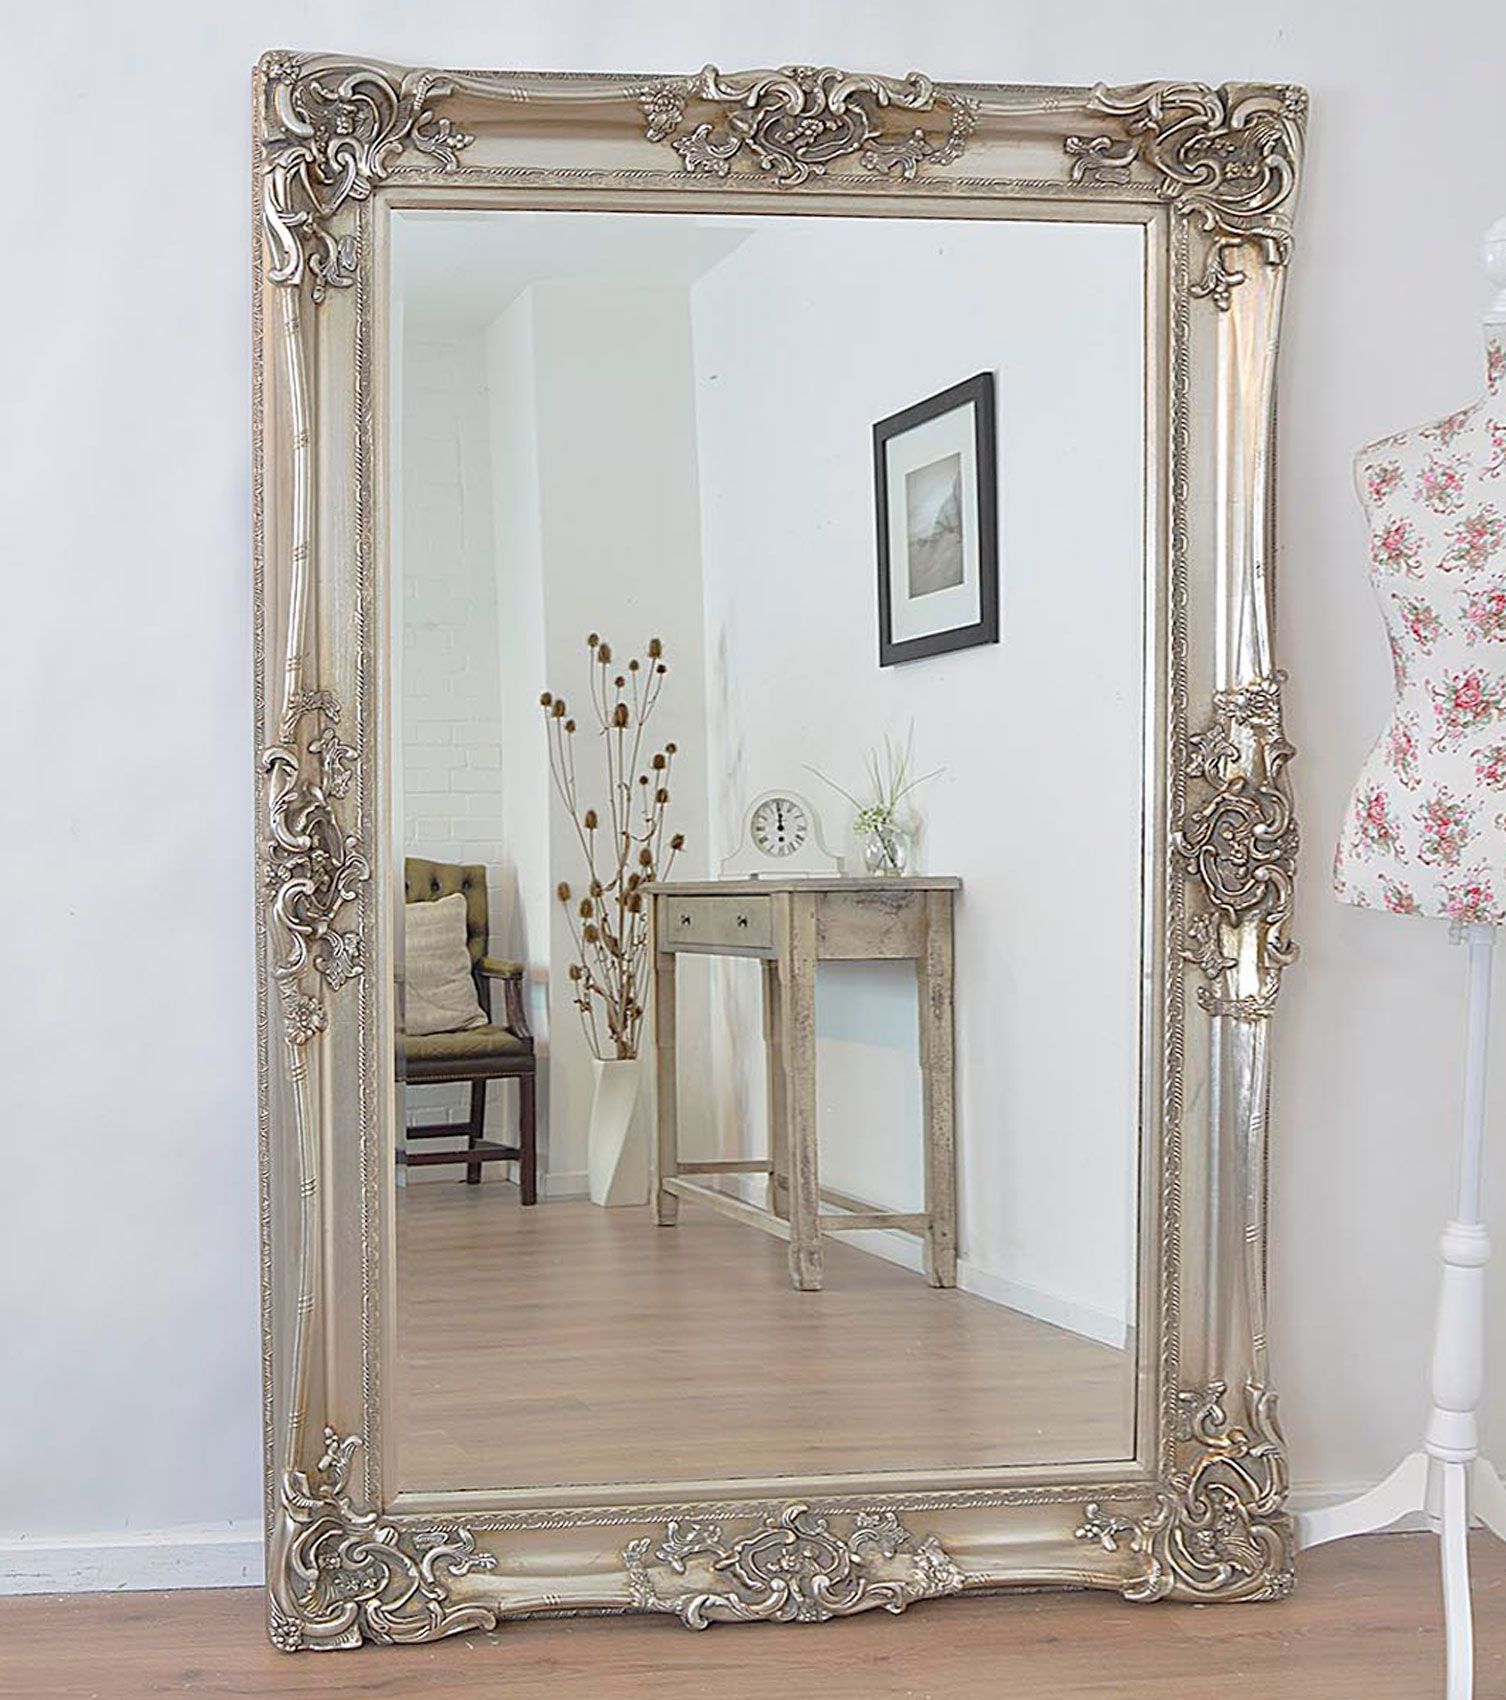 Antique Design Ornate Wall Mirror Will Make A Beautiful Addition To Any In High Wall Mirrors (View 6 of 15)